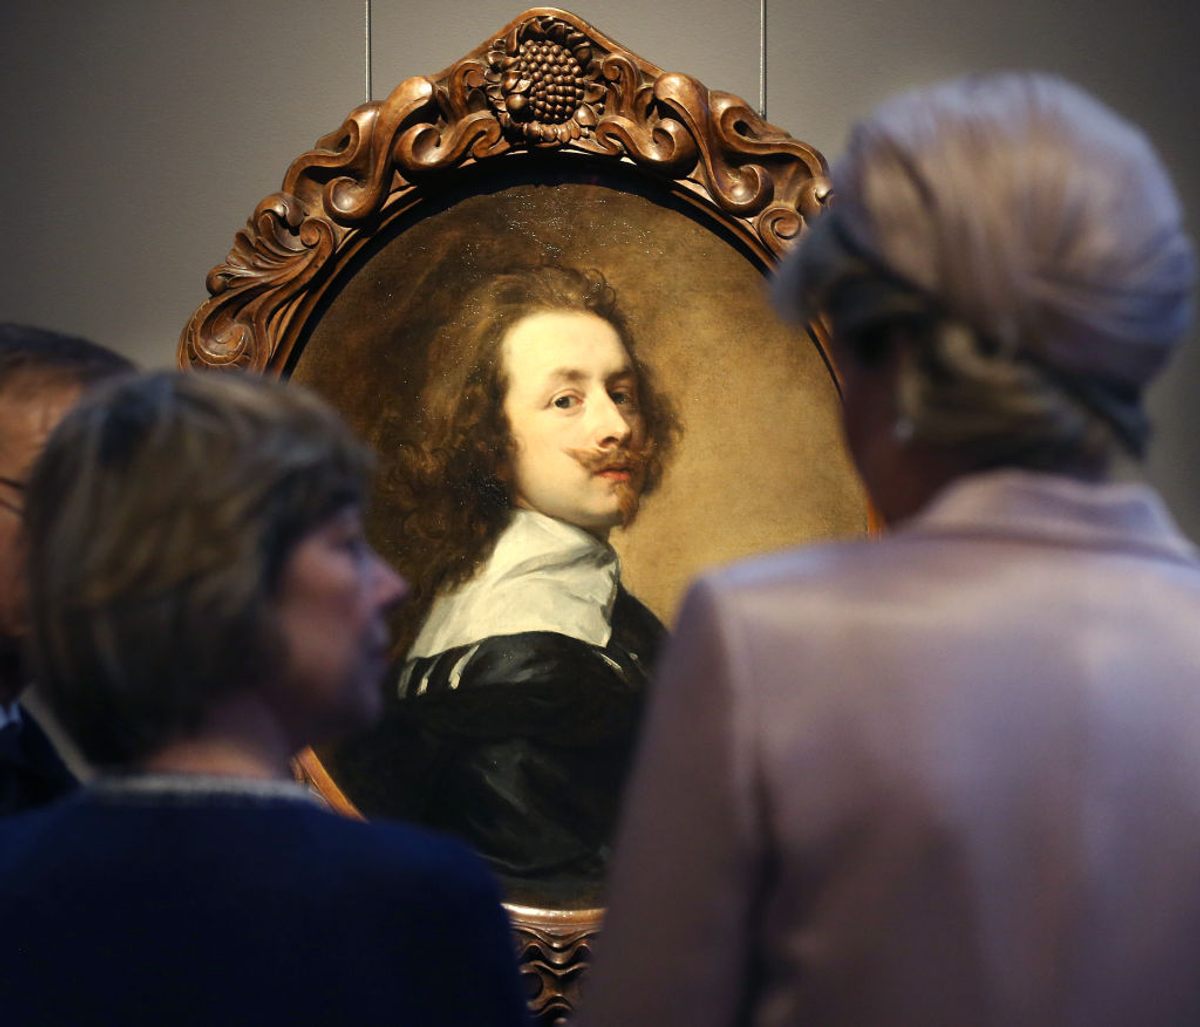 Anthony van Dyck painted many self-portraits, including the one on display at the Rubens House in Antwerp, Belgium.